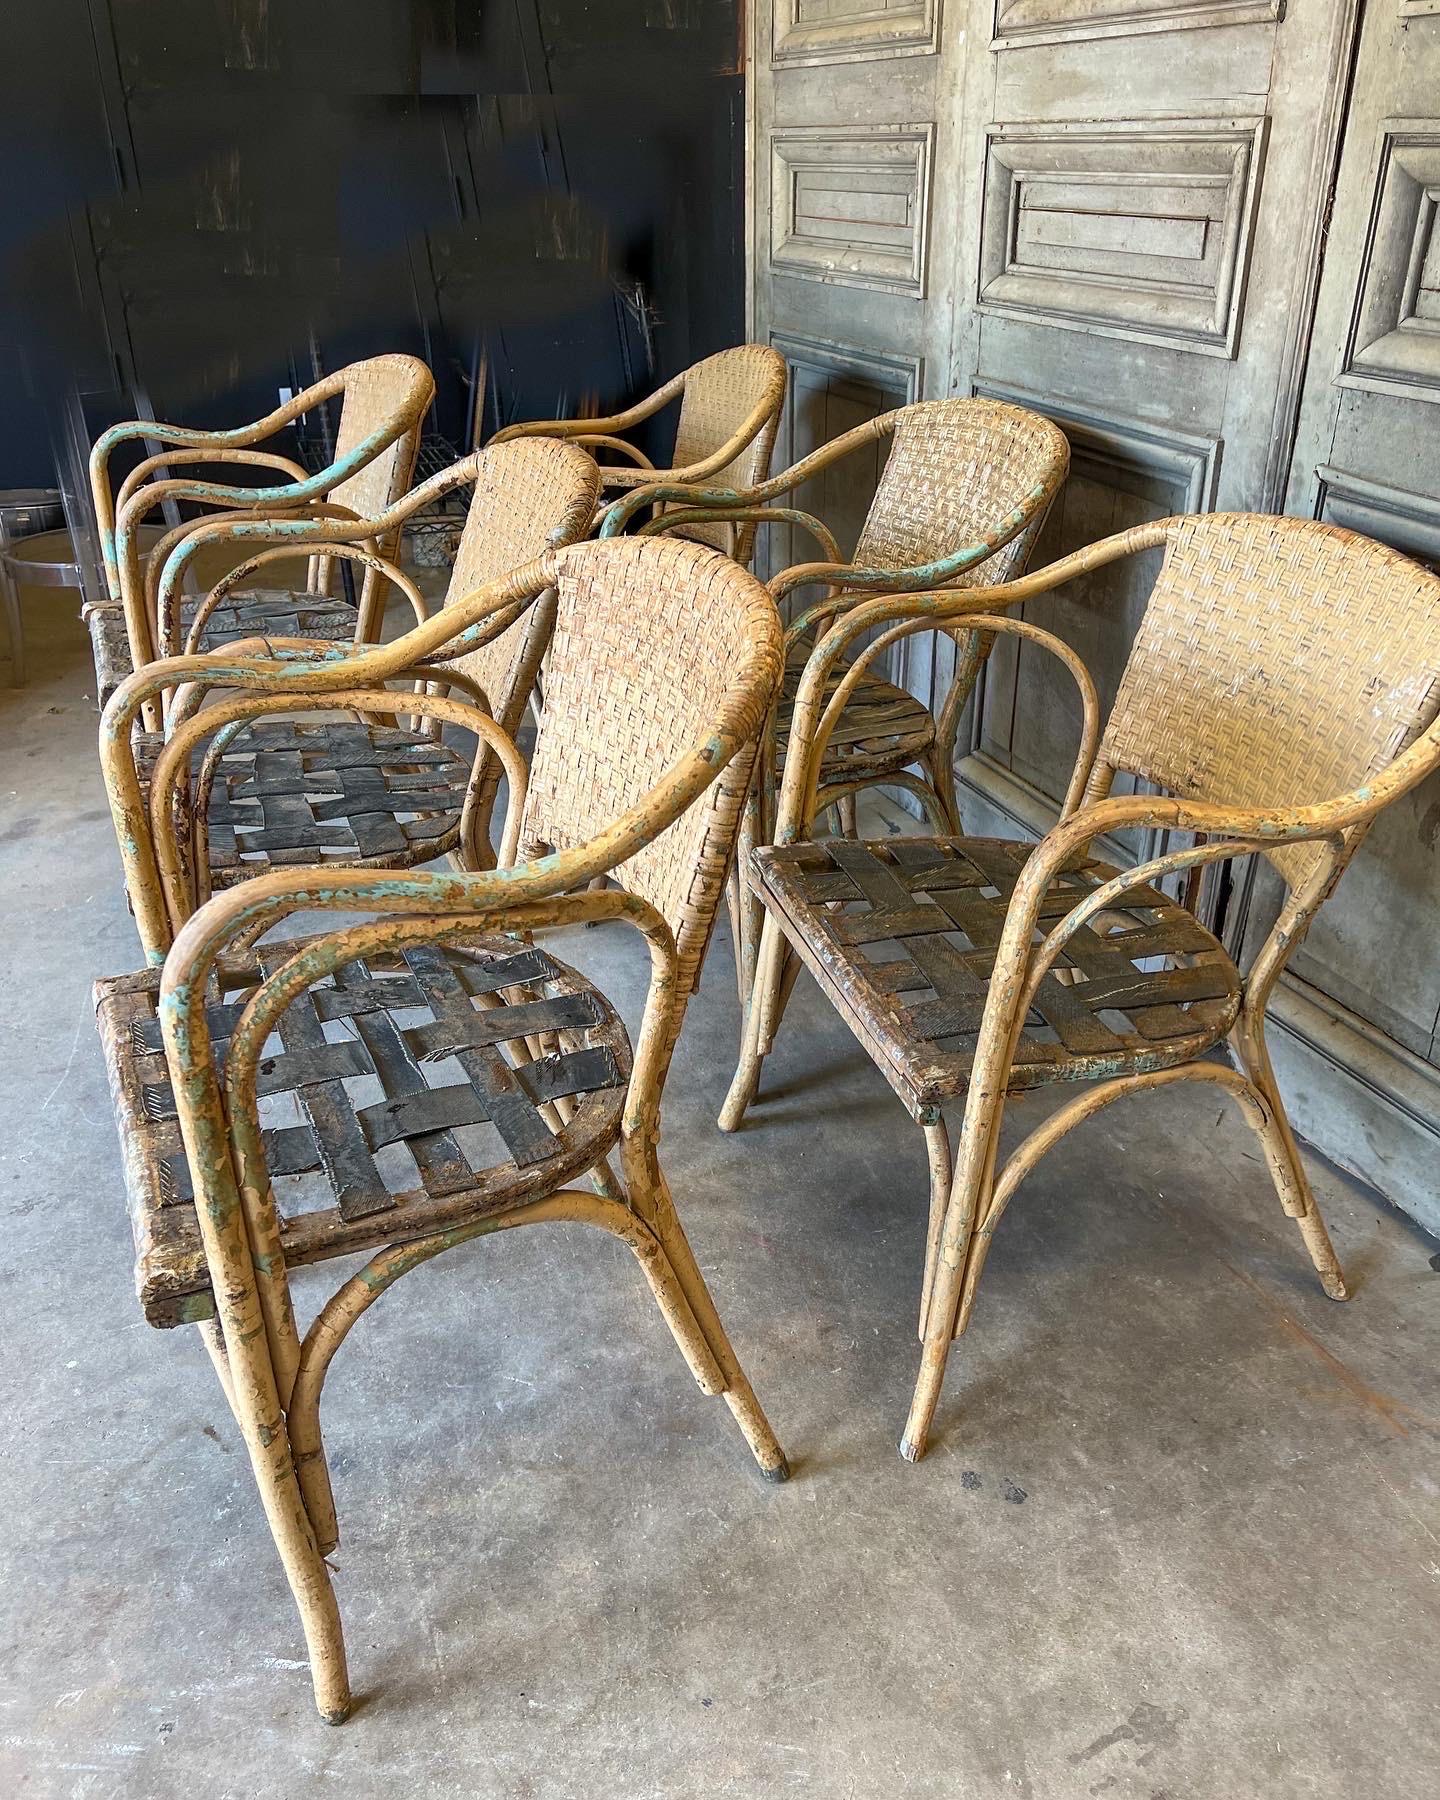 This vintage Spanish set of 6 chairs were recently discovered in the Catalonia region of Northern Spain and are crafted from bamboo with a lovely patina of distressed paint and woven cane back. The seat itself is crafted of rubber strips making it